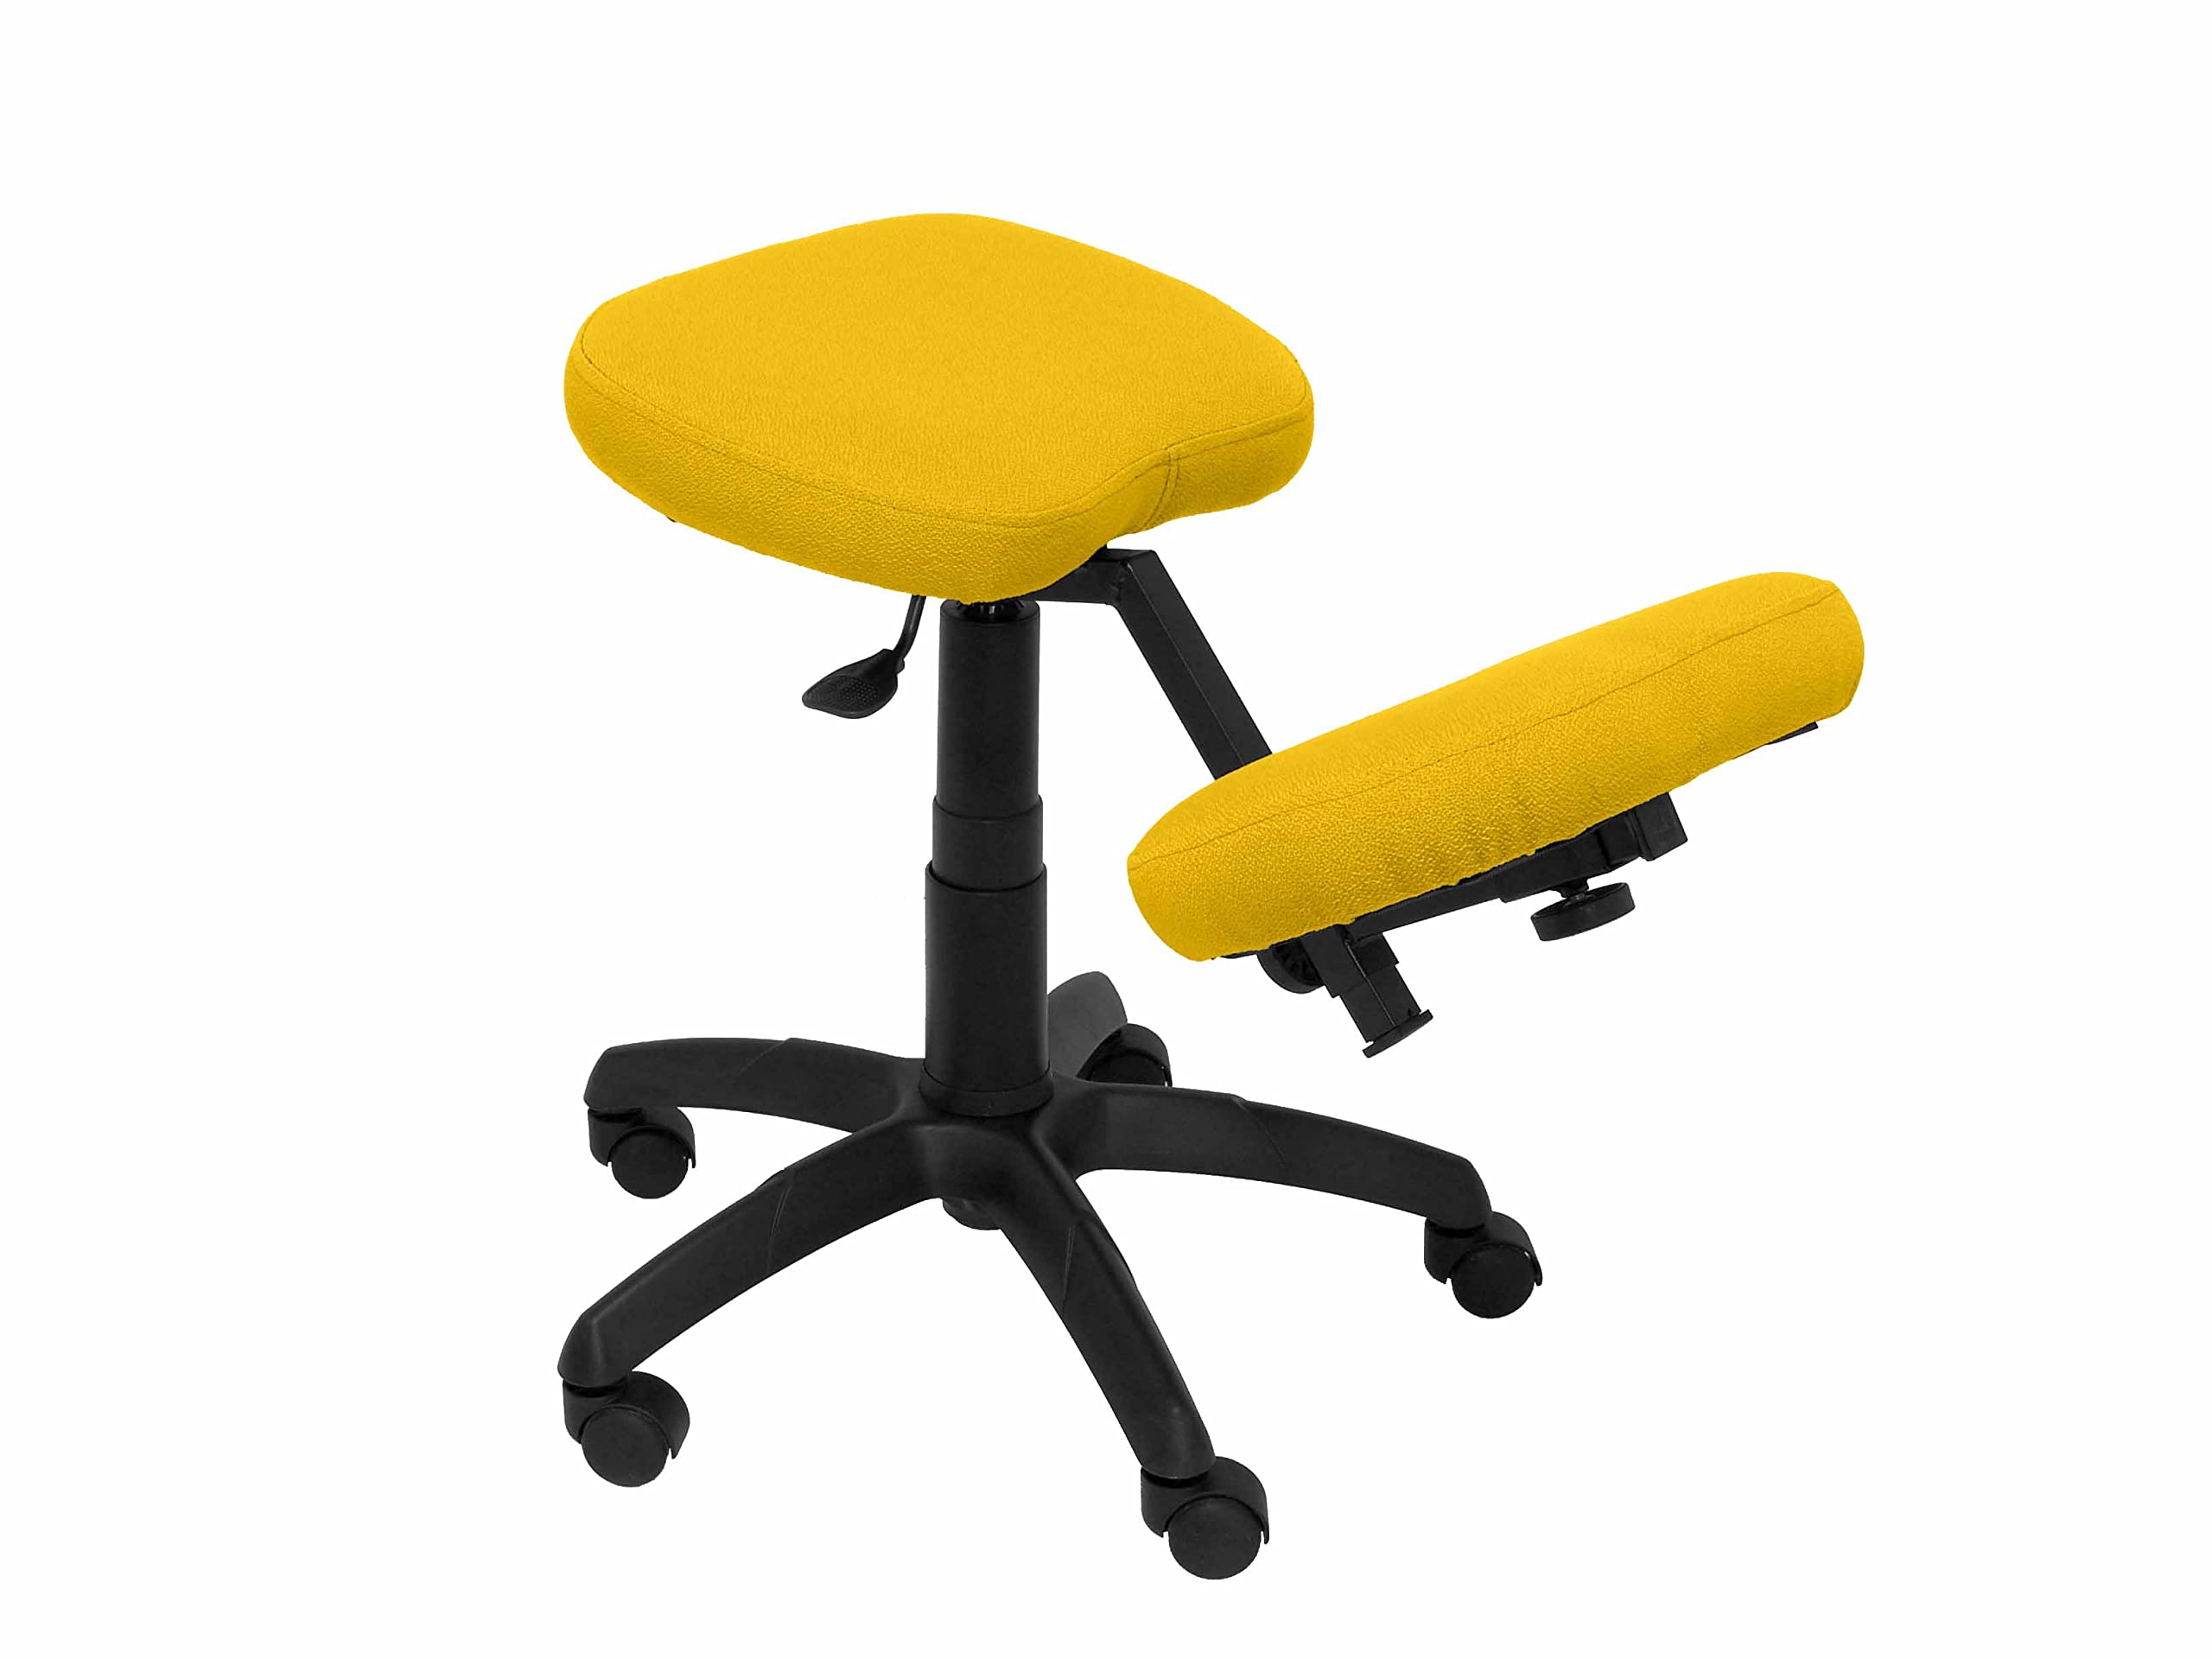 Piqueras and Crespo 37 g – Ergonomic Office Stool Rotatable and Adjustable in Height